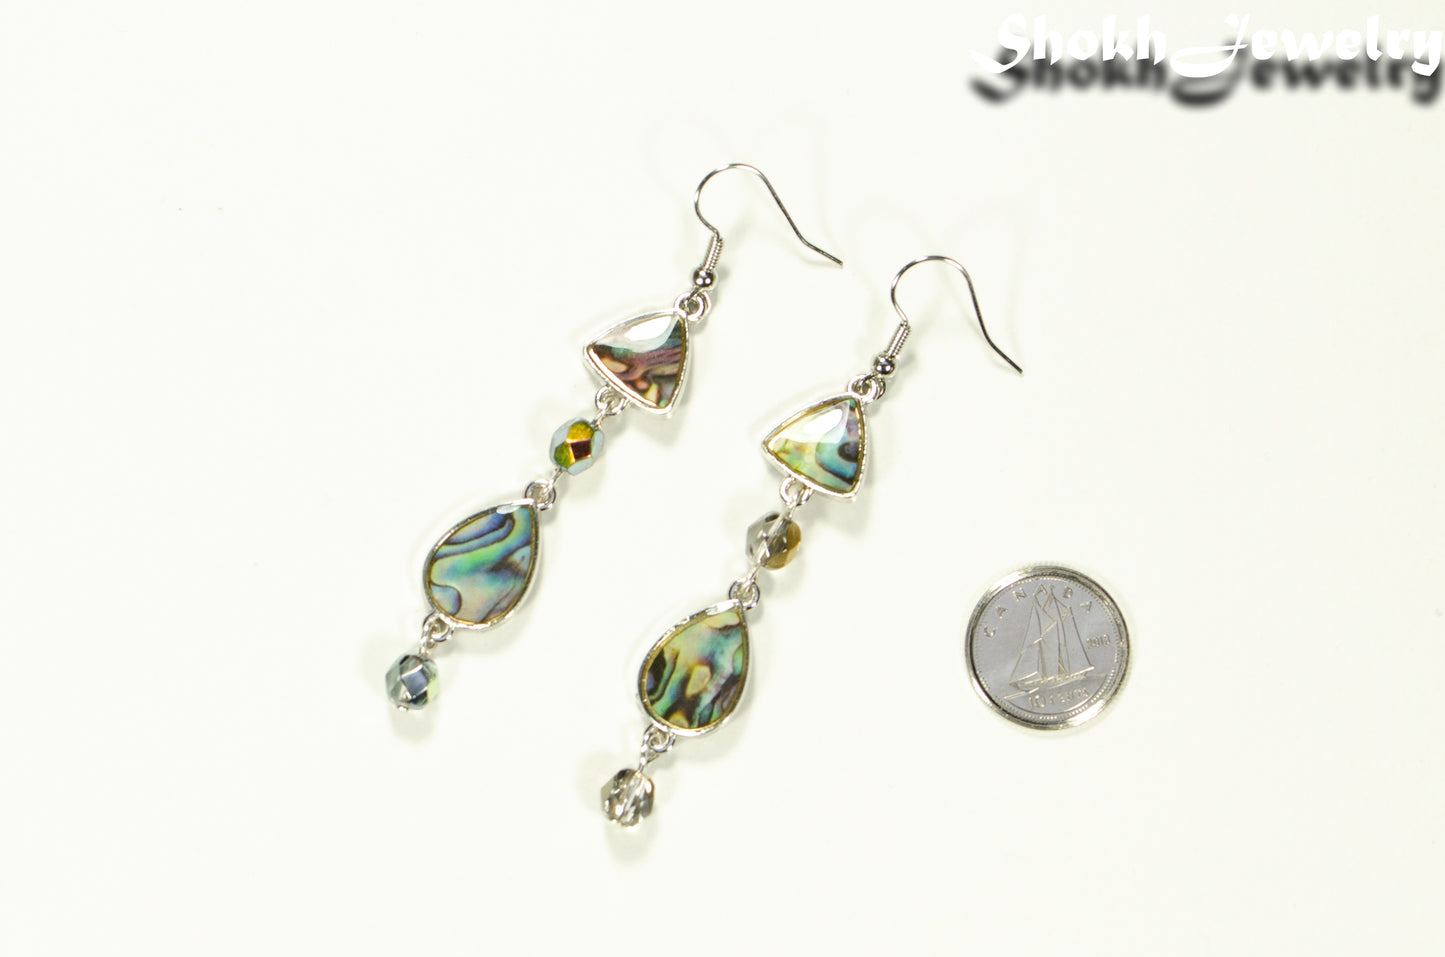 Long Abalone Shell and Glass Crystal Earrings beside a dime.